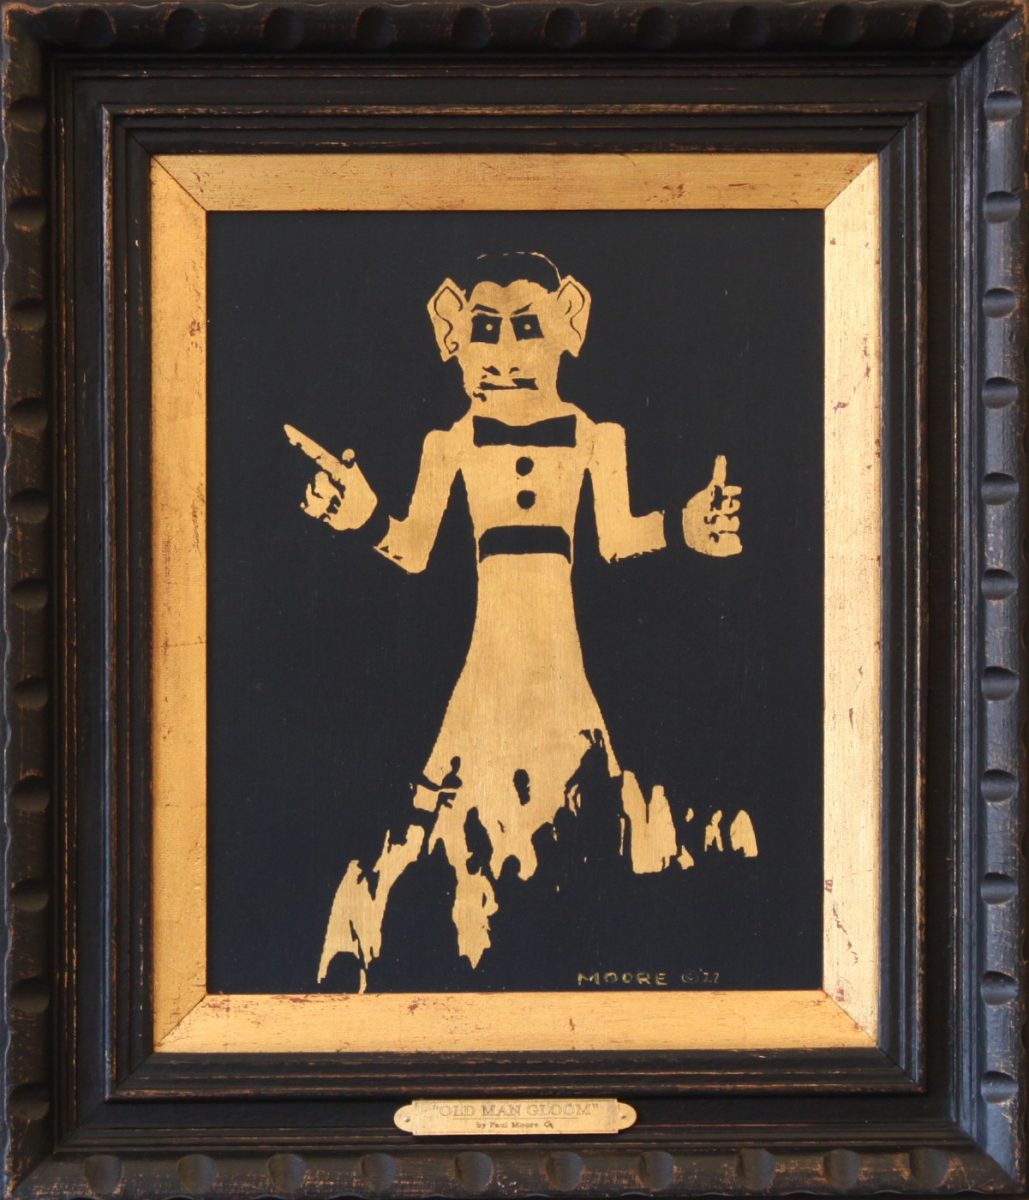 Gold leaf painting of Zozobra by Paul Moore